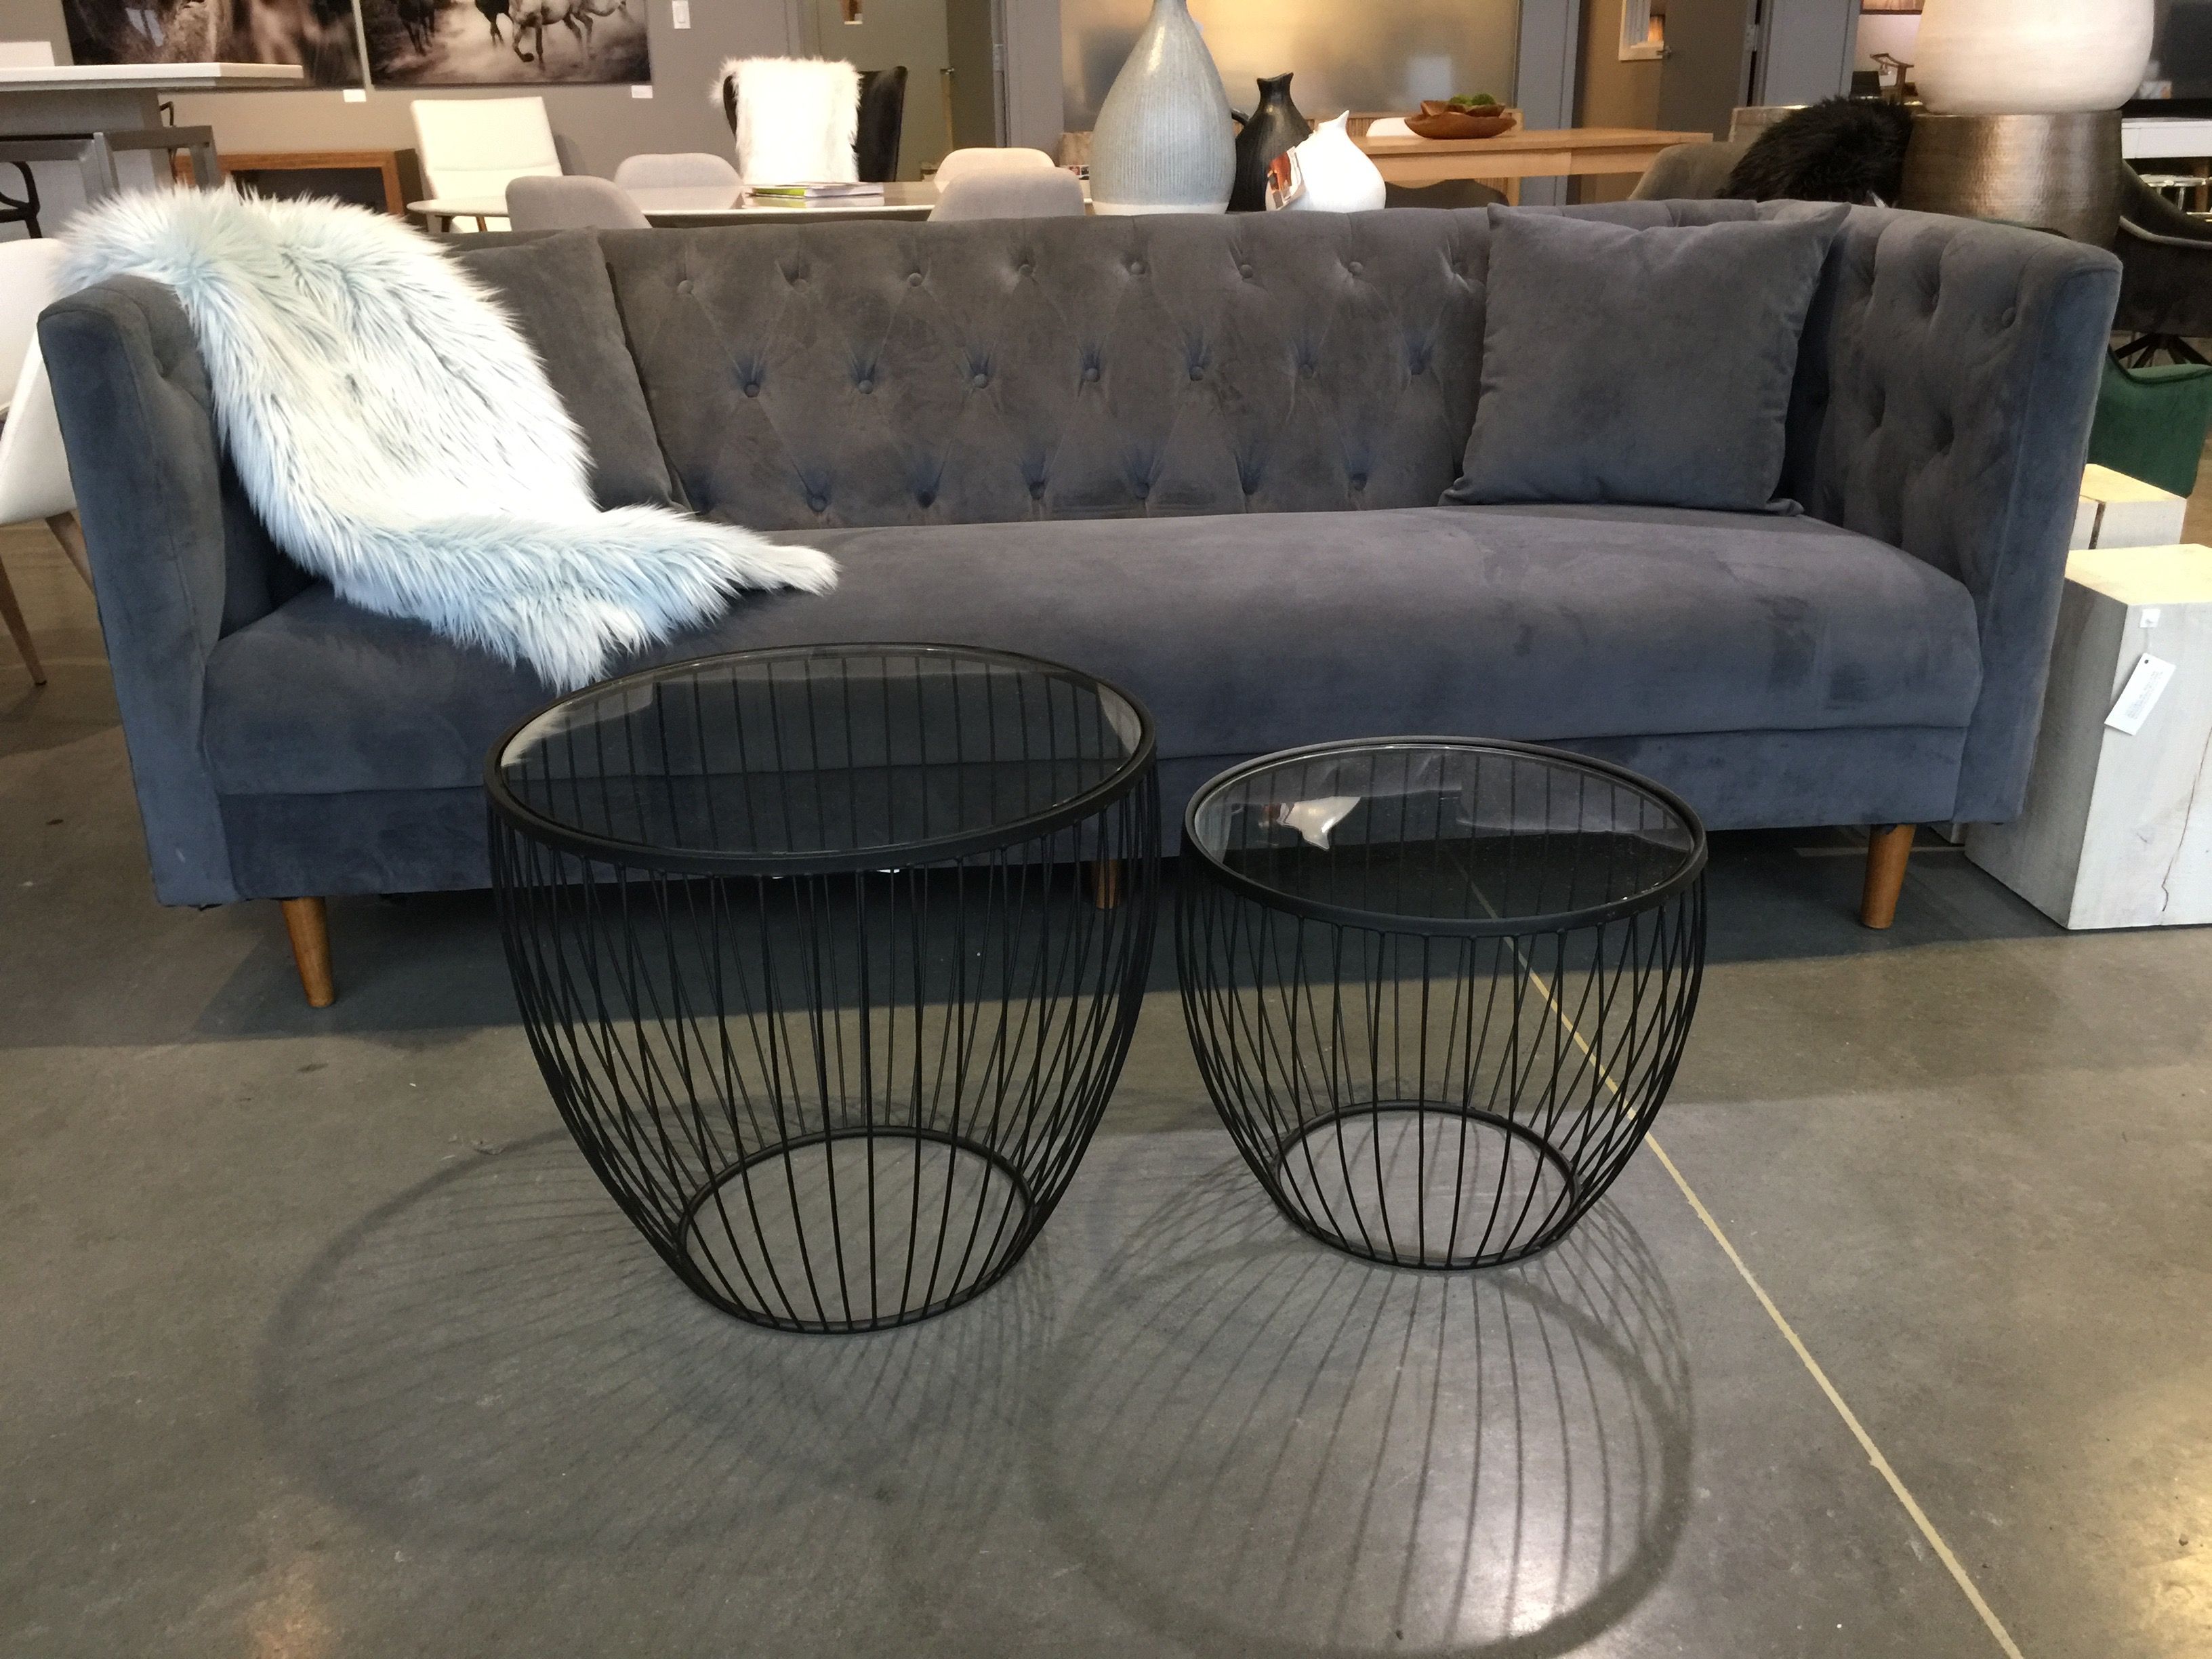 cyclone glass accent tables matte black set living room our metal and are the perfect addition any patio dining sets clearance bbq side table bunnings swing chair long slim